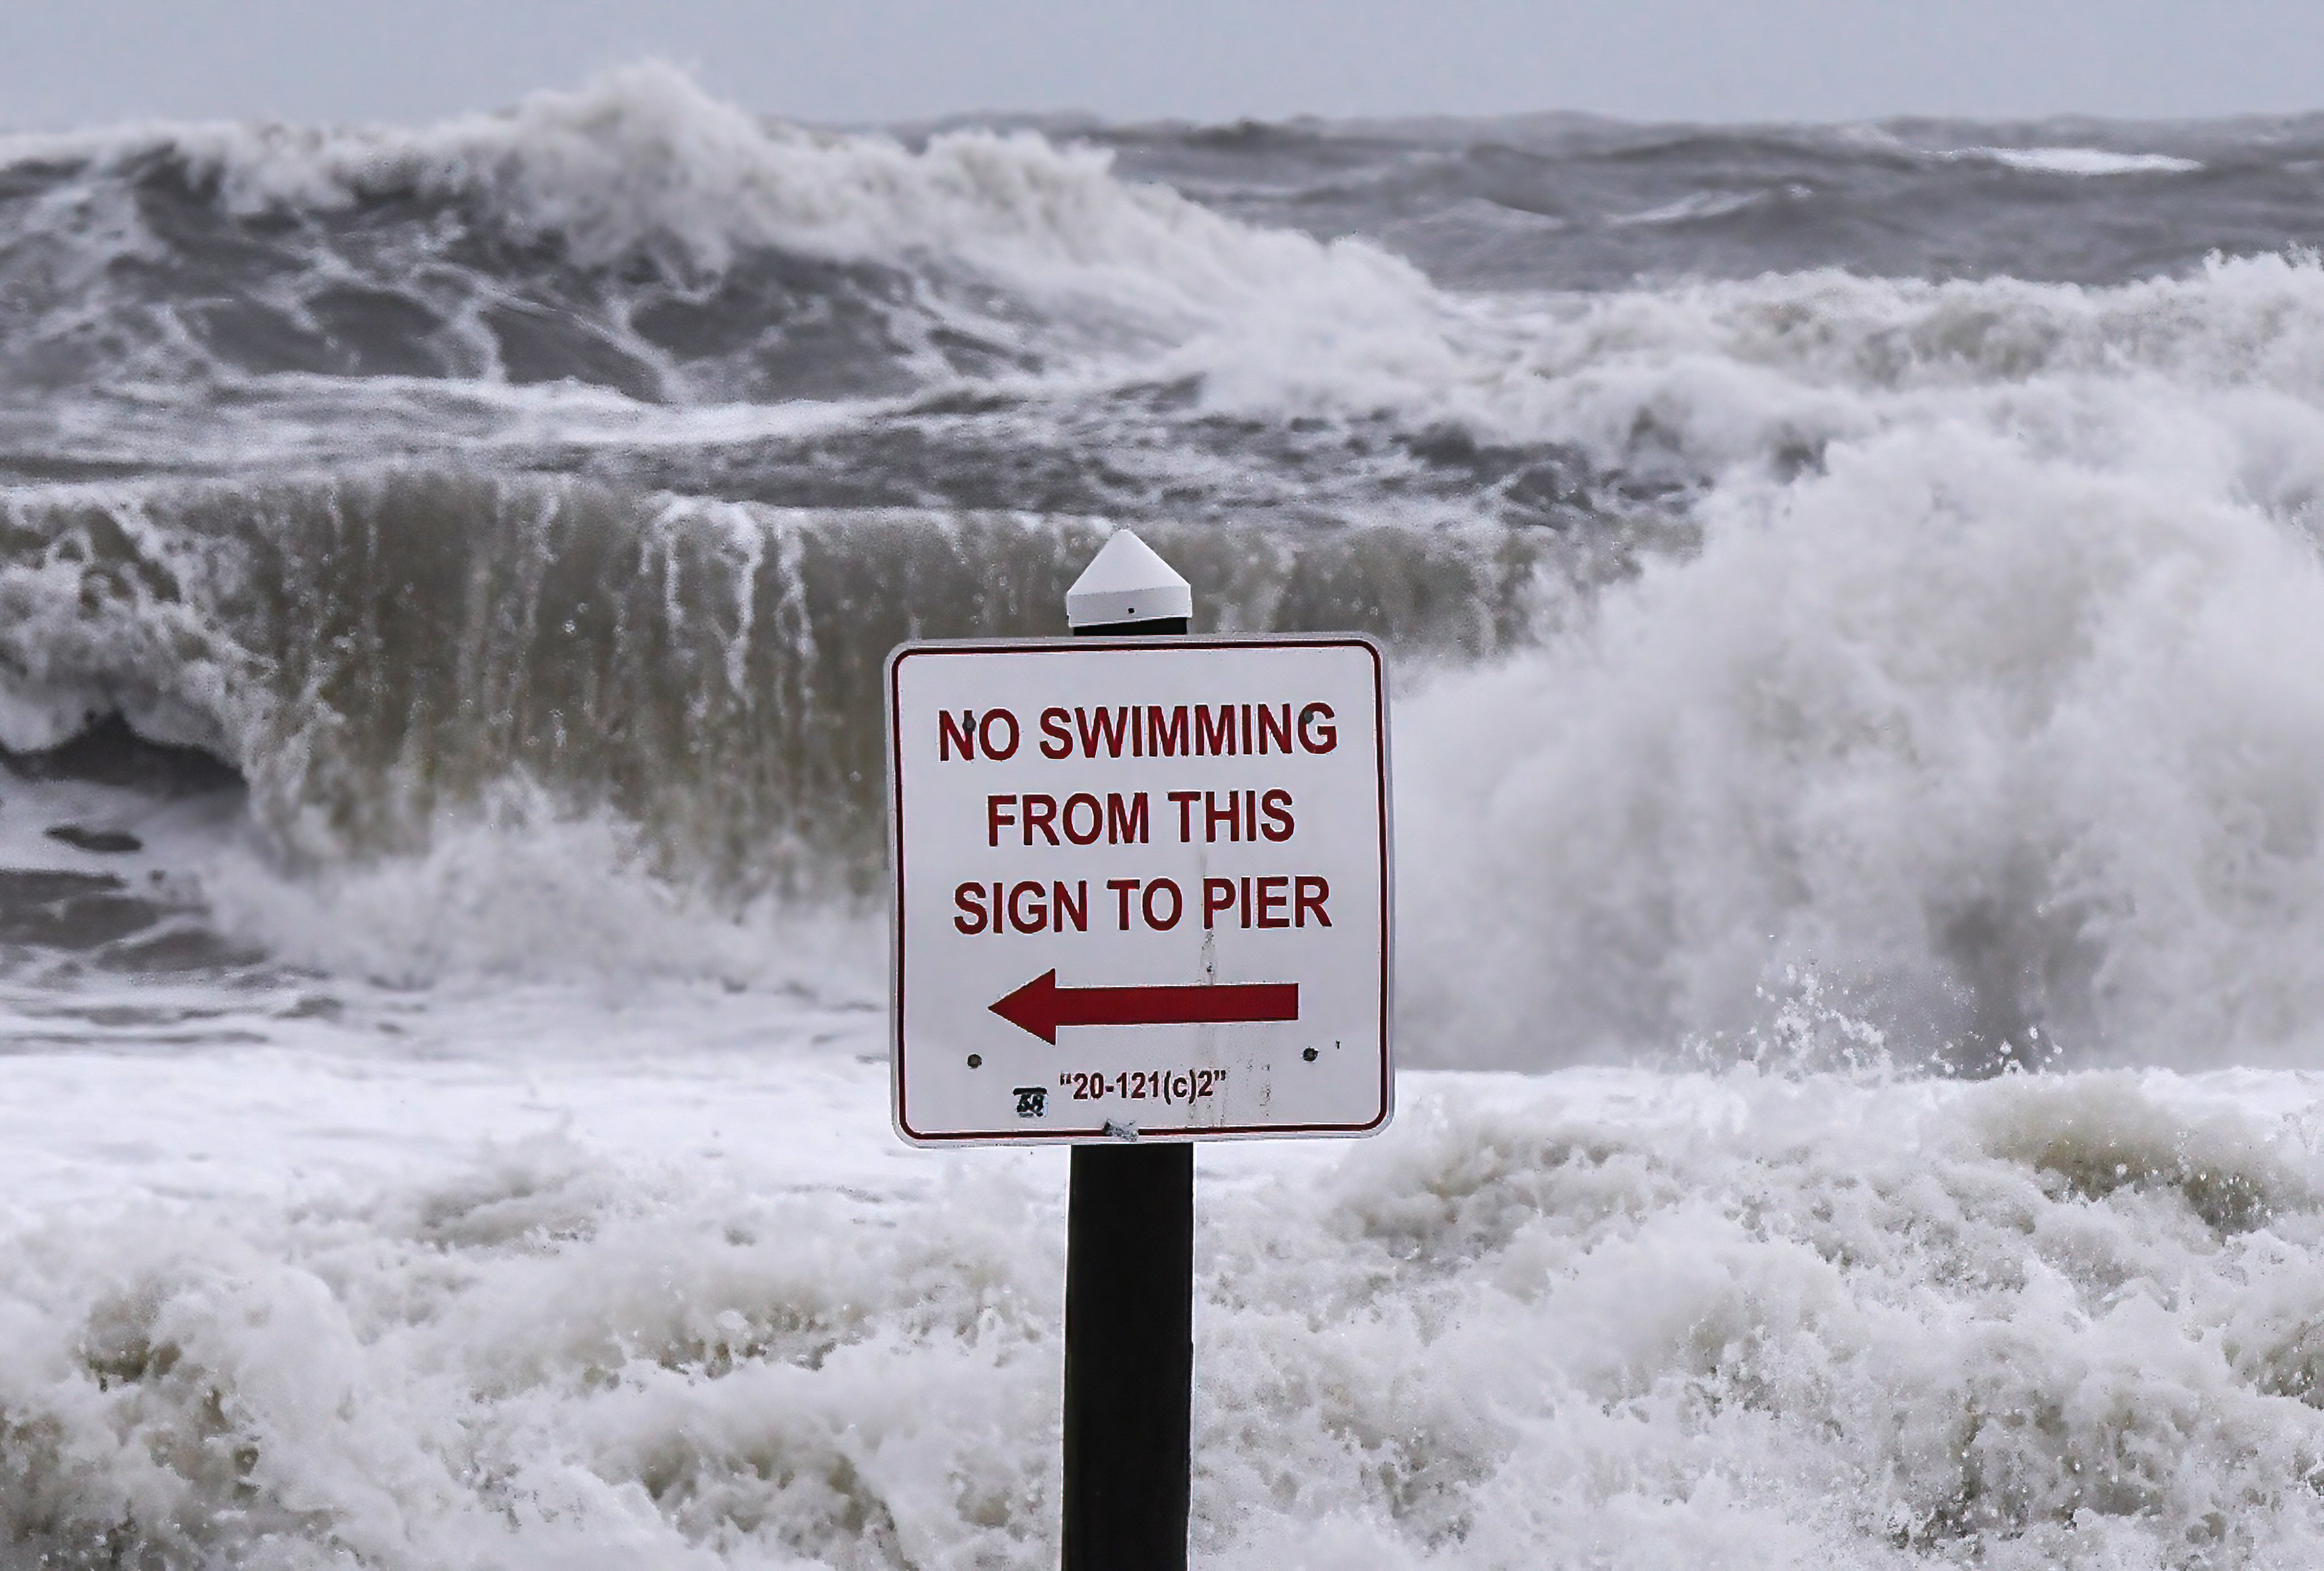 Rough surf is seen near a No Swimming sign in Daytona Beach